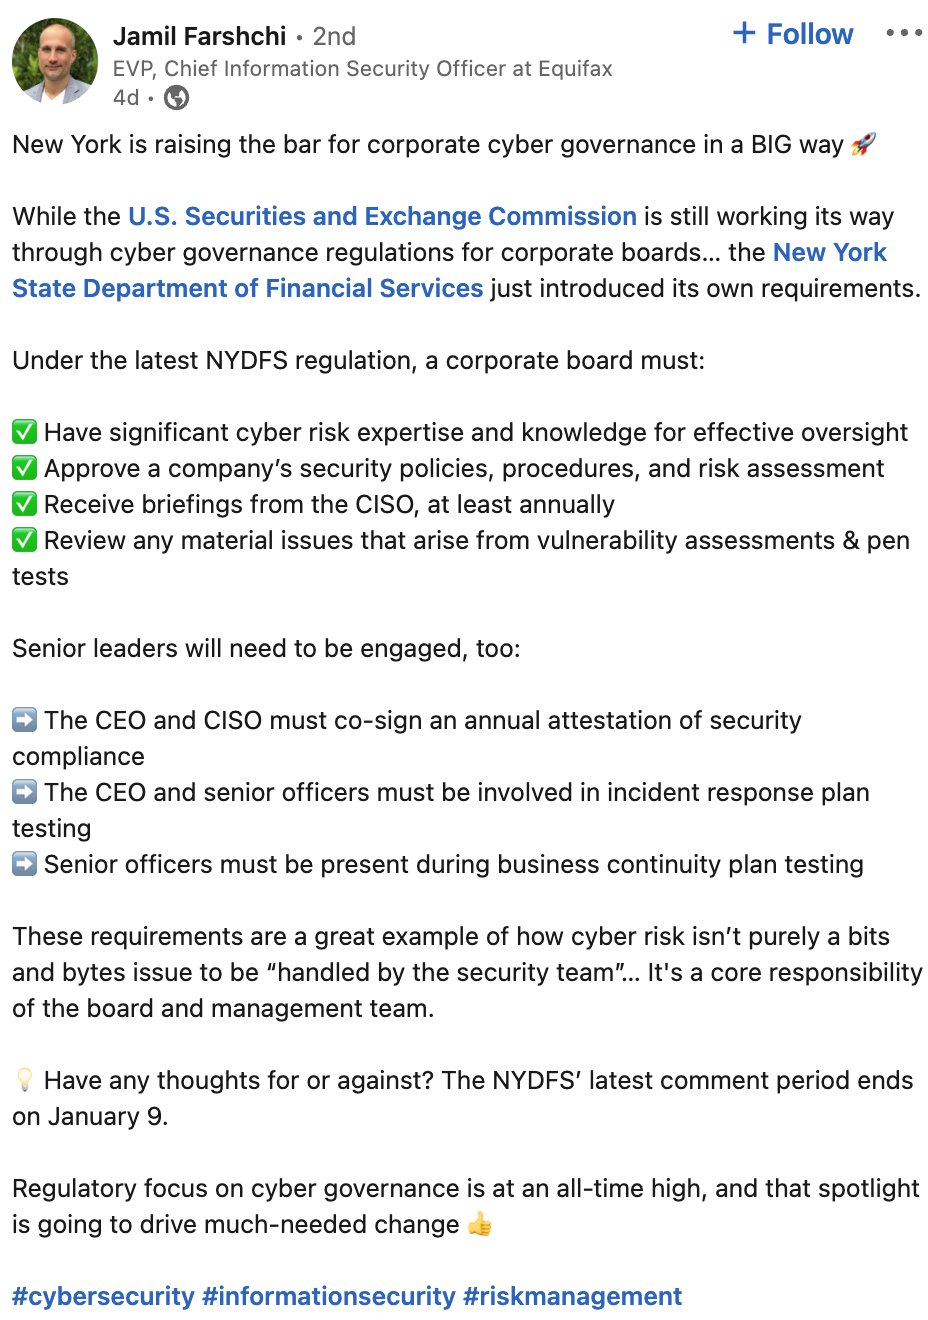 NYDFS cybersecurity